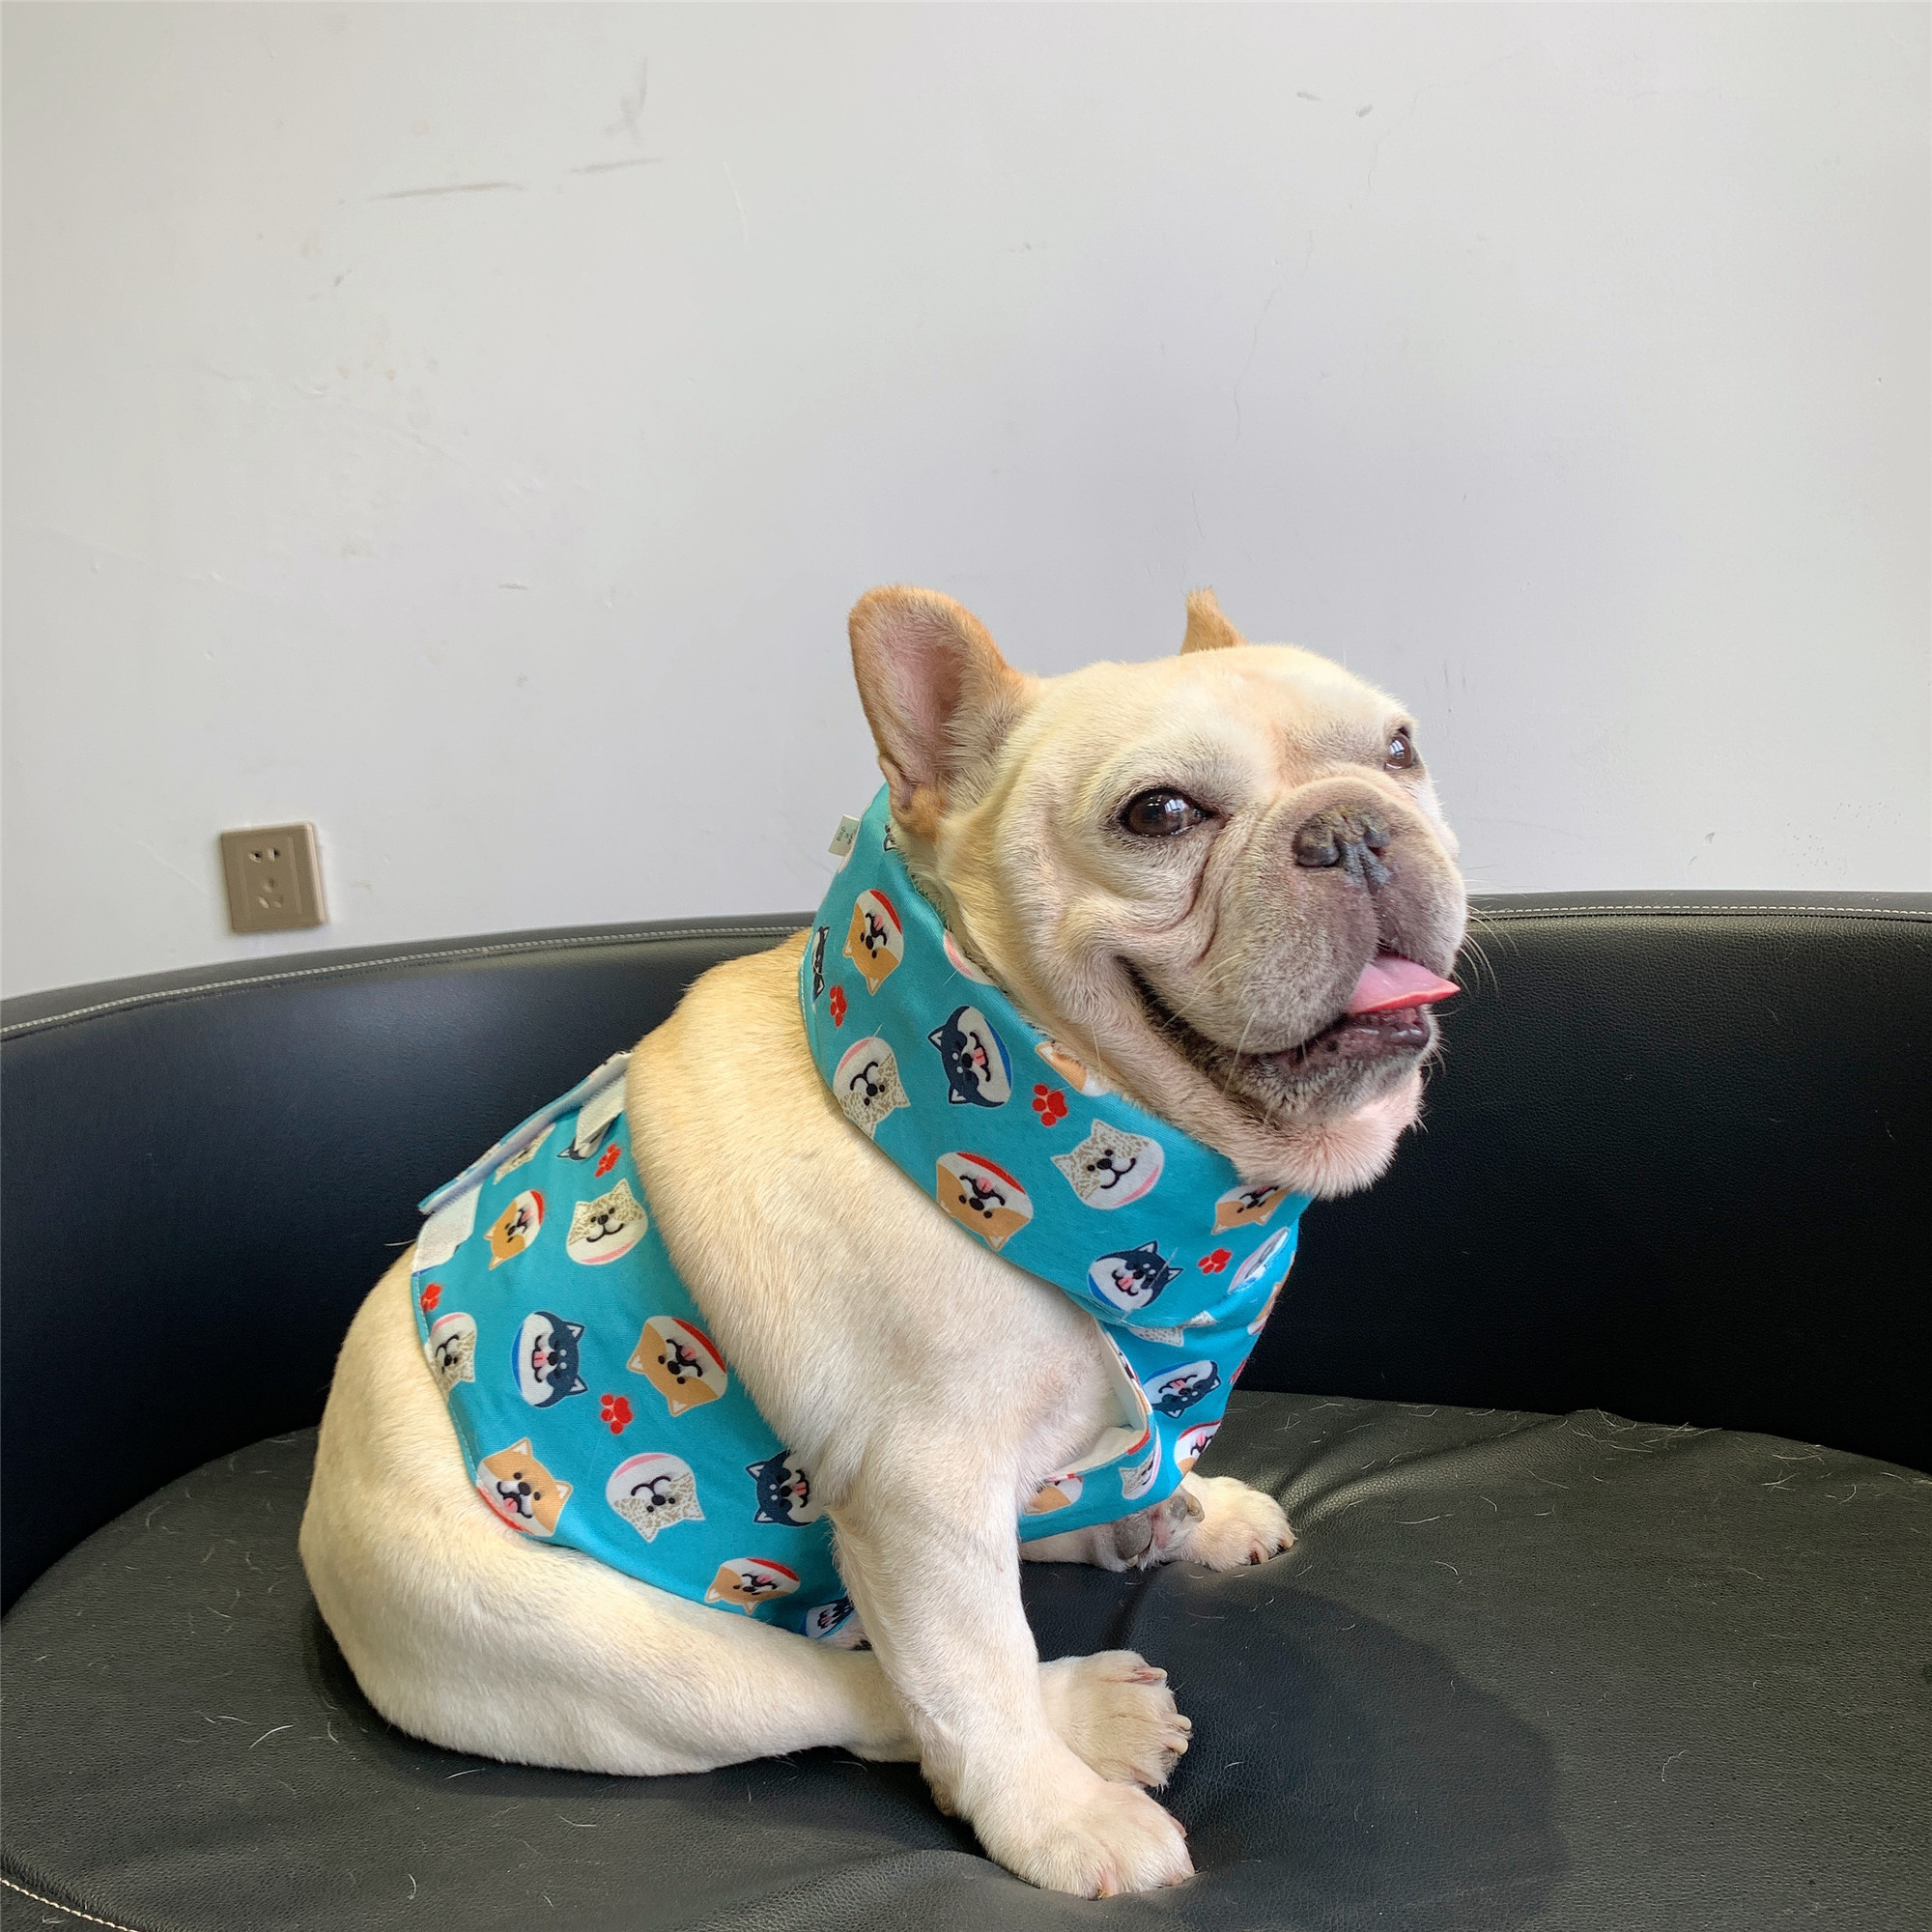 A small dog, wearing a blue Cooling Vest and a Cooling Dog Scarf, sits on a grey leather sofa, gazing at me with a playful tongue sticking out.